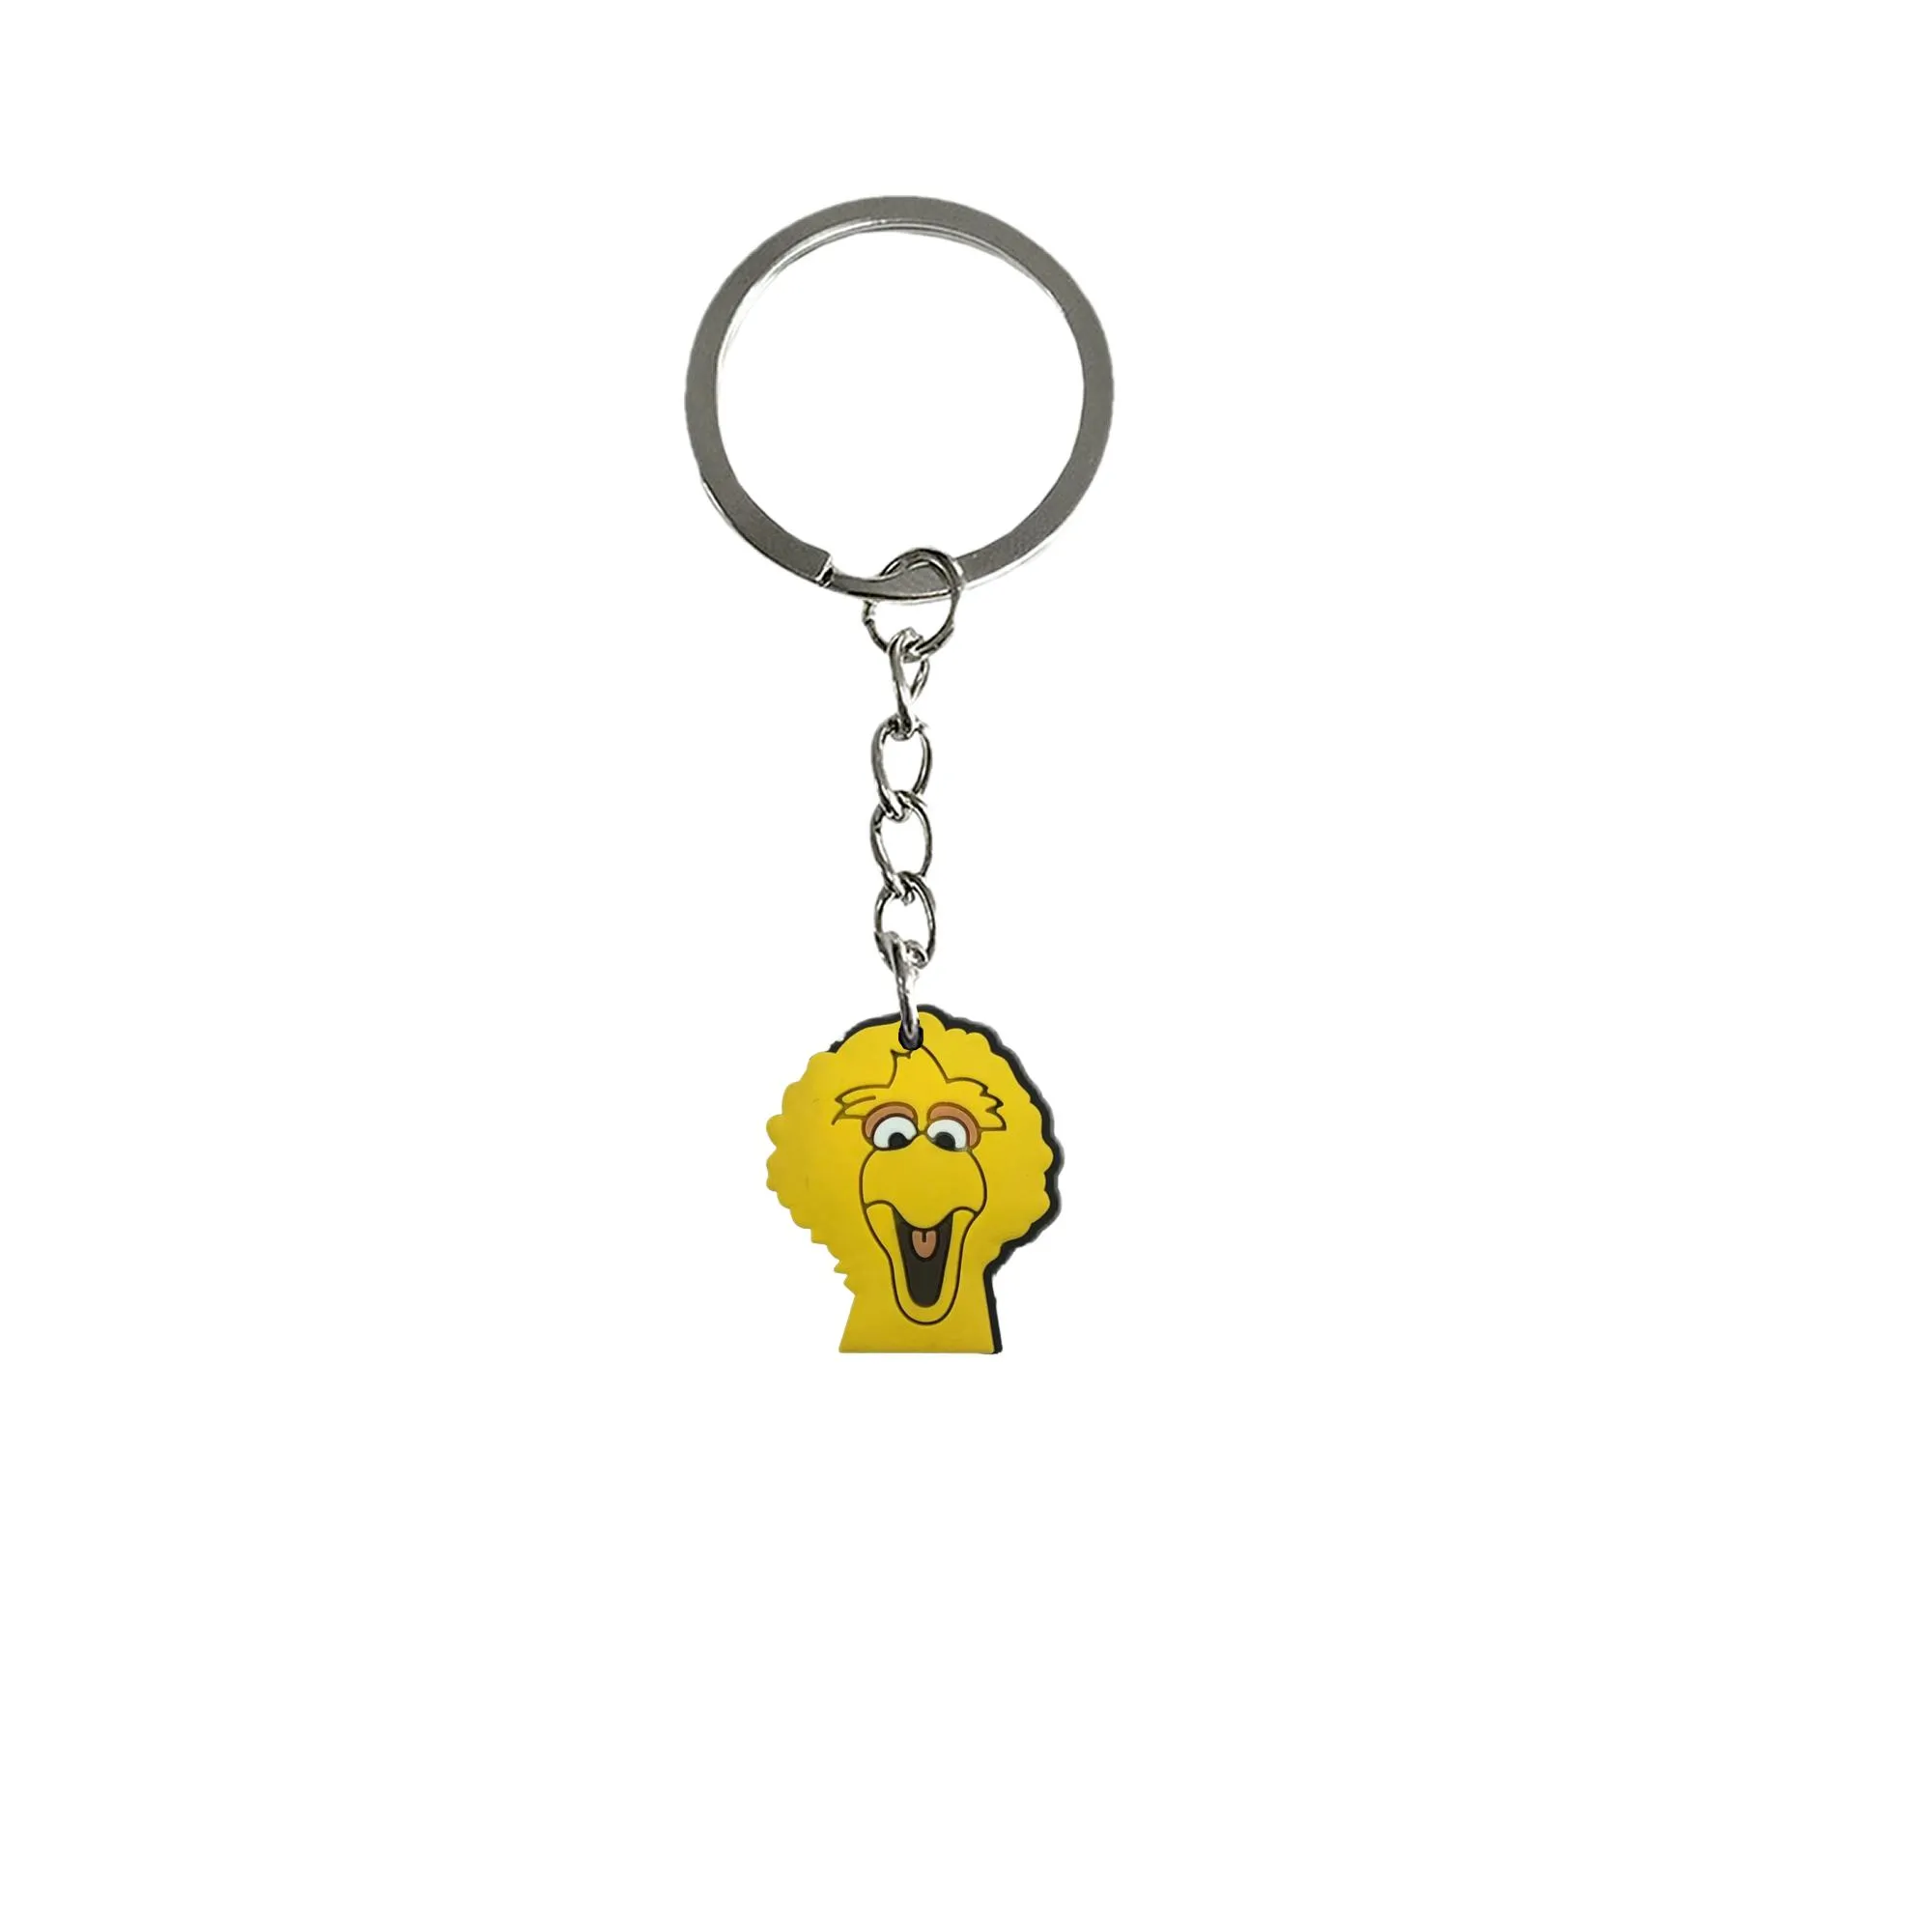 sesame street keychain keyring for men birthday christmas party favors gift goodie bag stuffers supplies suitable schoolbag backpack shoulder pendant accessories charm keychains boys